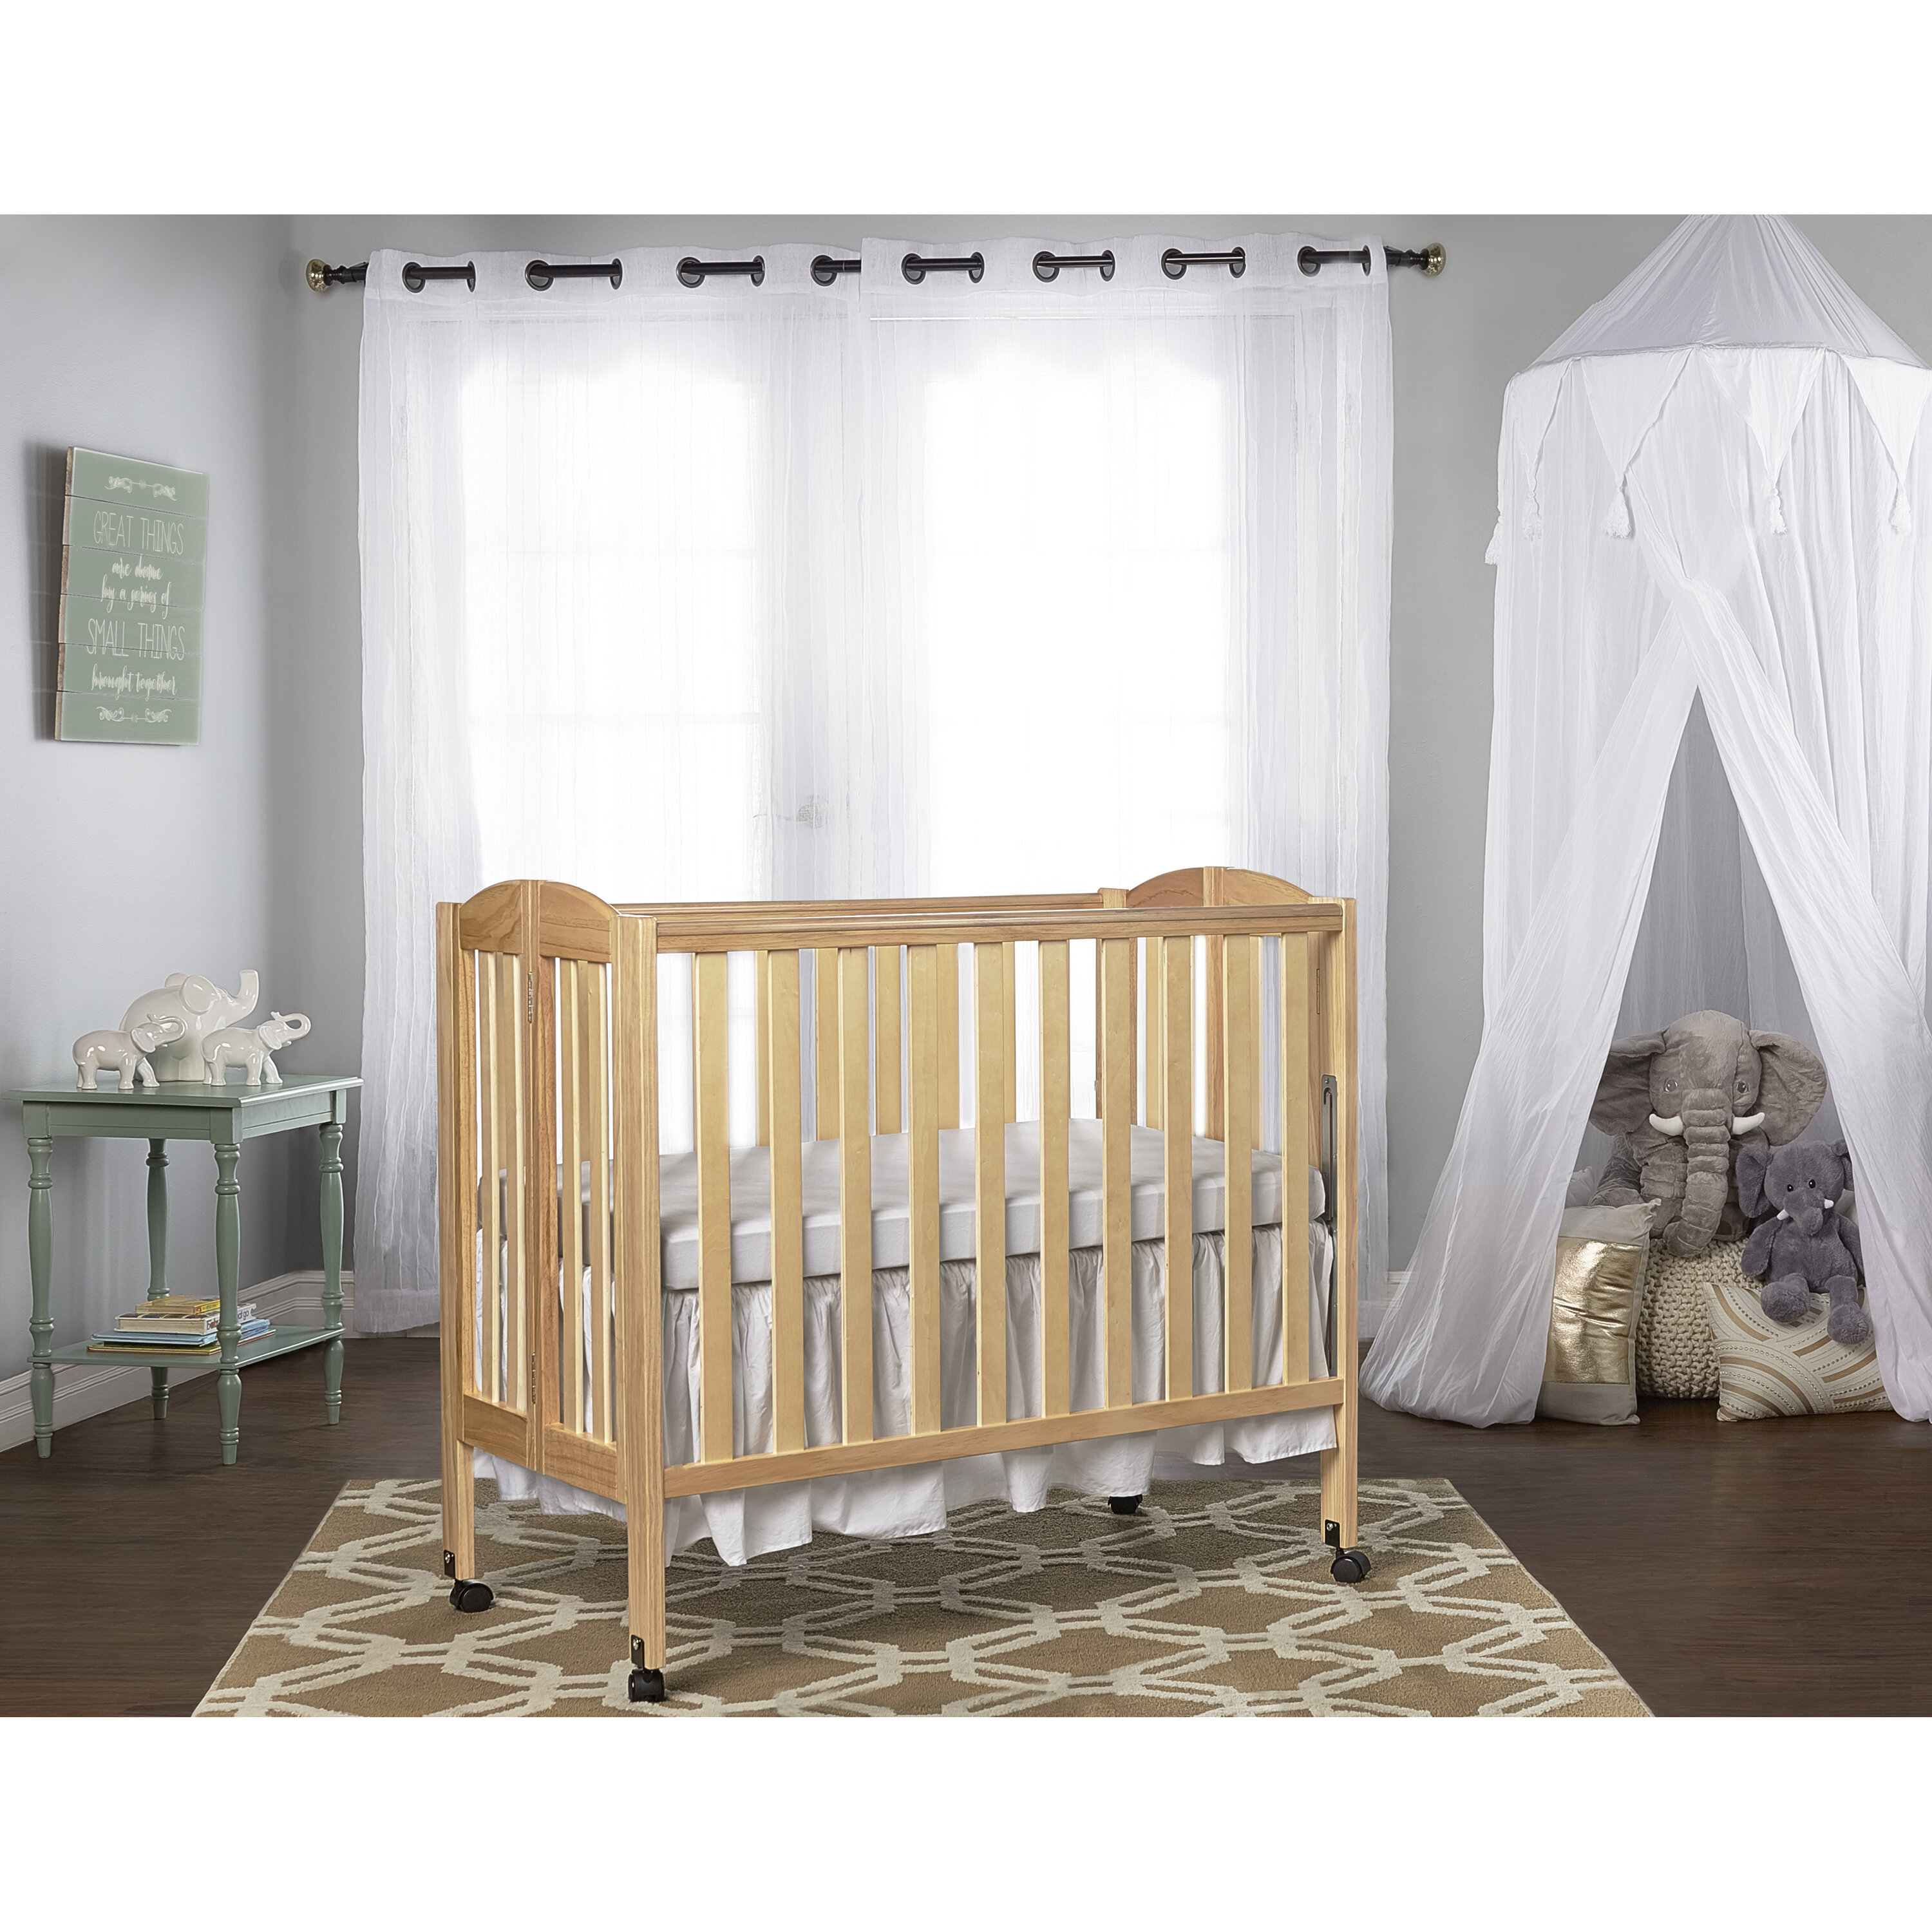 Dream On Me 2 in 1 Lightweight Folding Portable Stationary Side Crib 